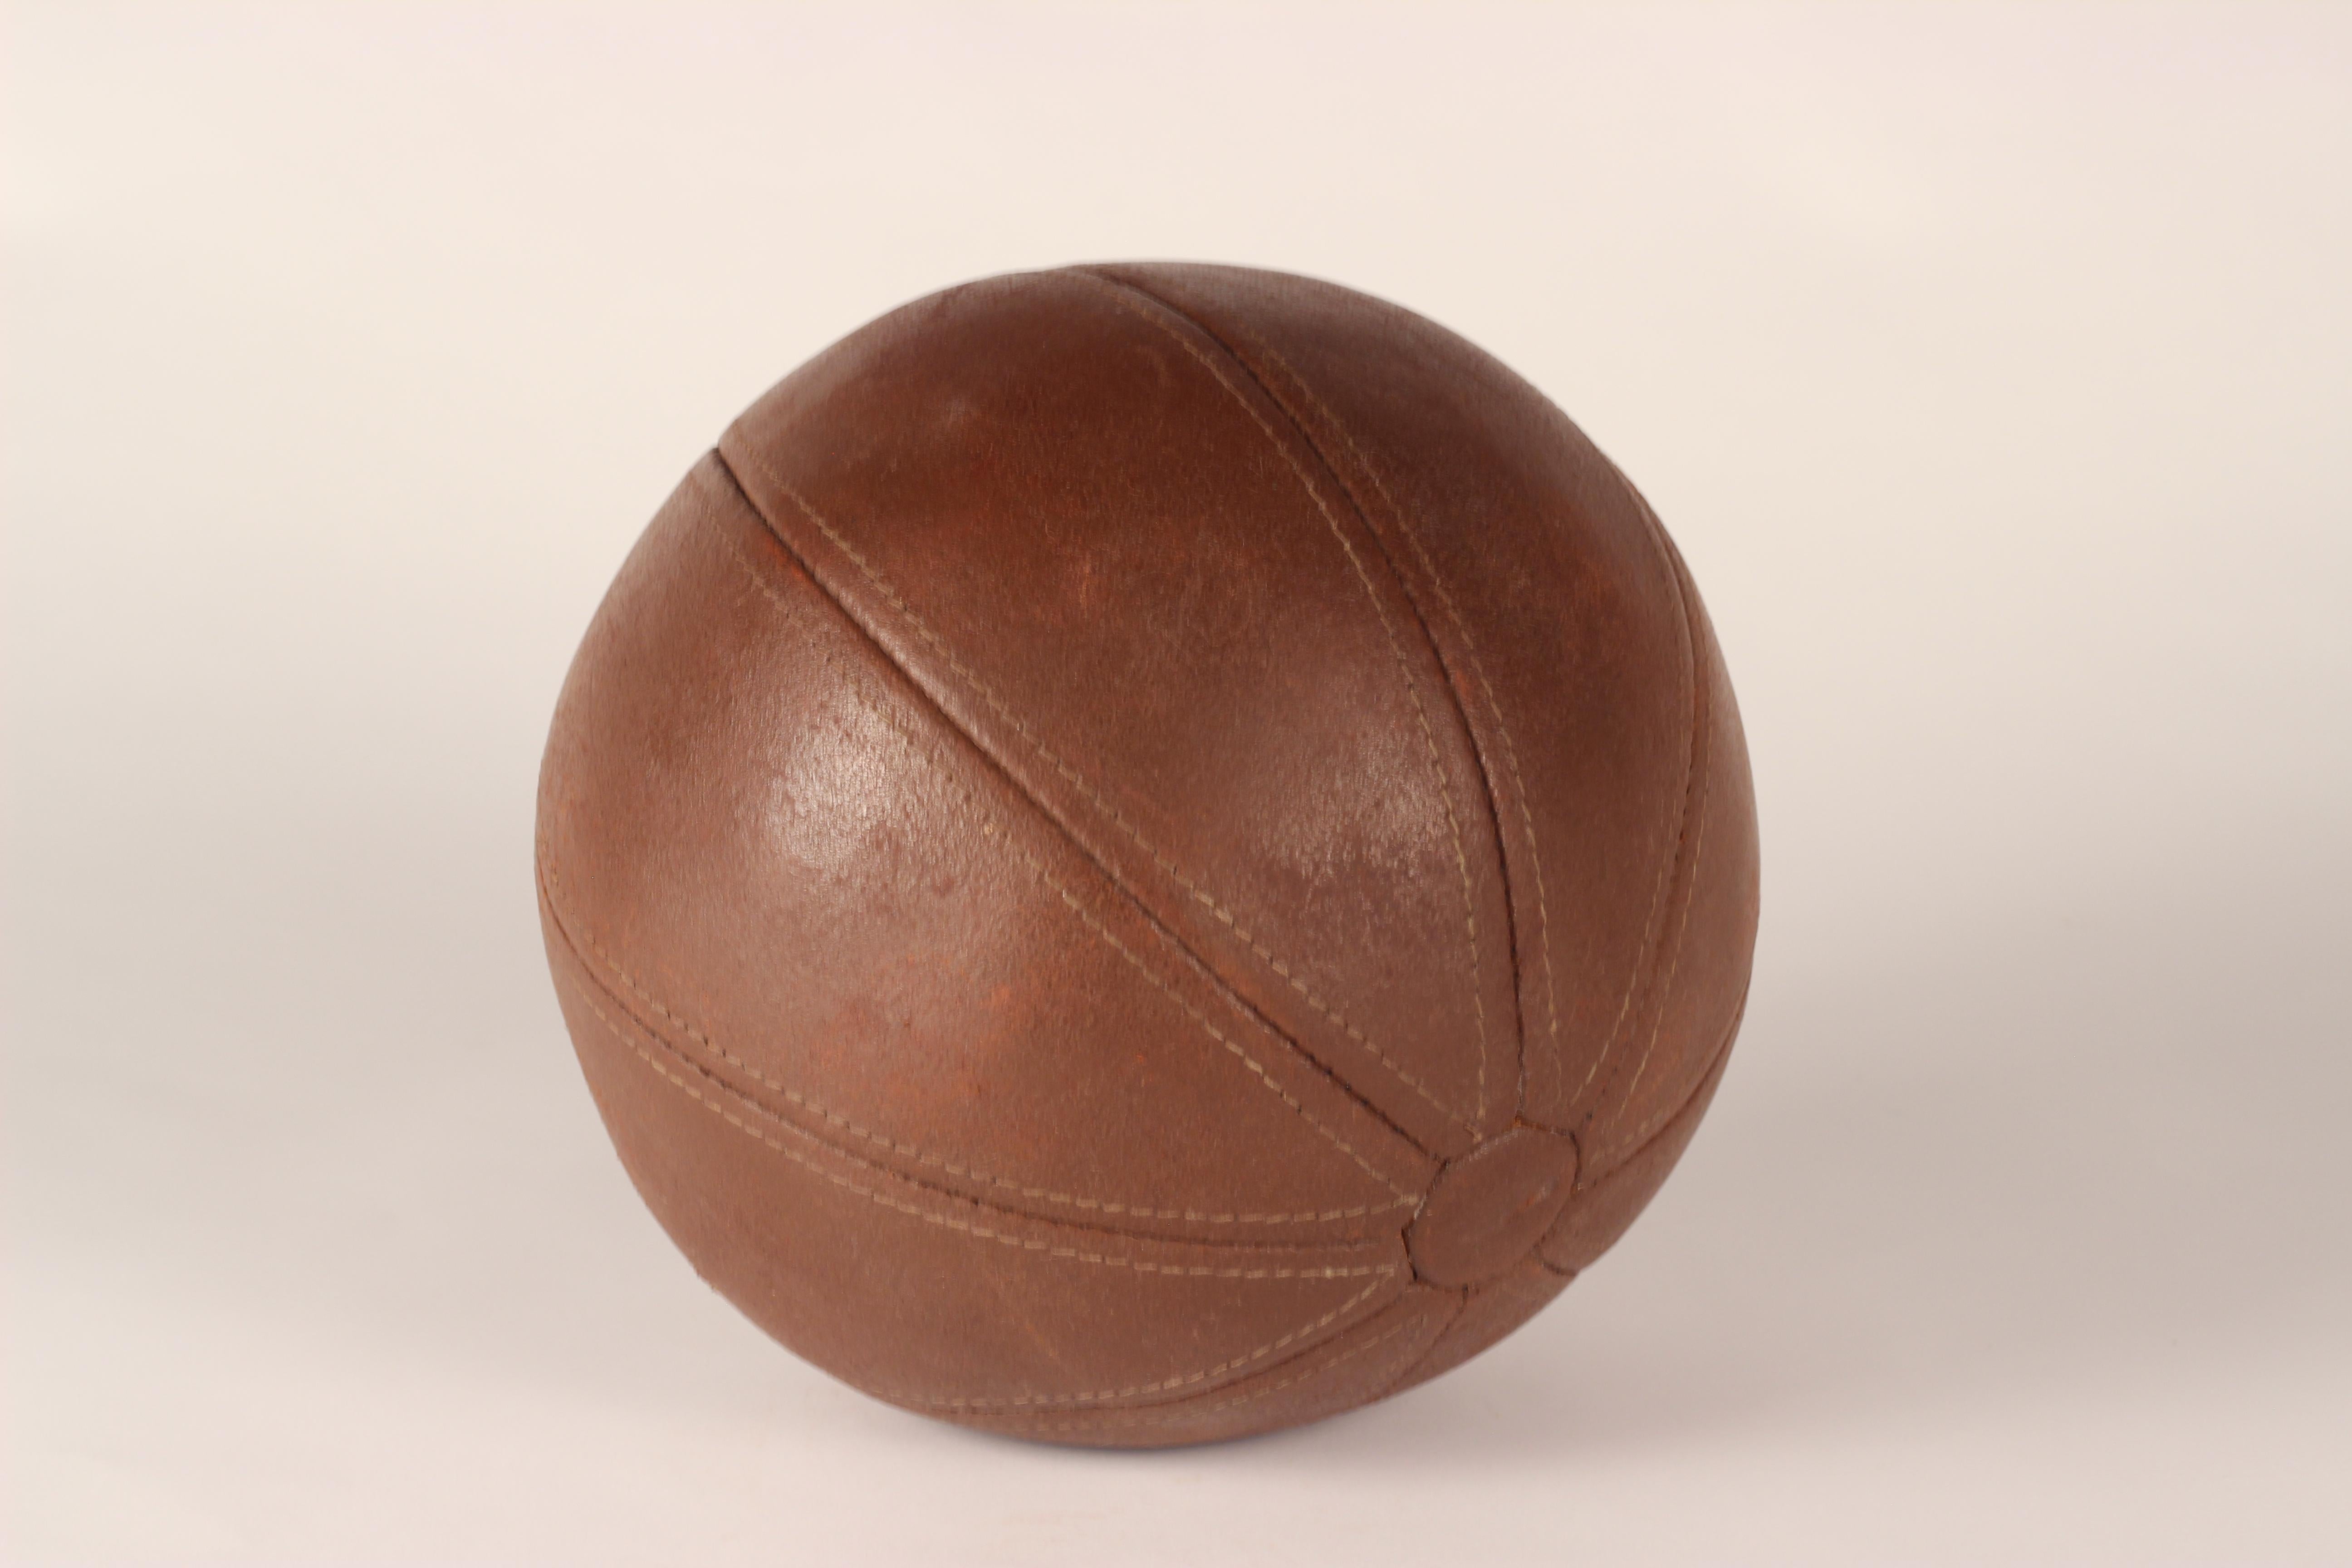 Early to mid-20th century leather medicine ball in good condition with wonderful patina that only comes with genuine wear and age, 3.1kg in weight. 

We invite you to follow us and look at our Storefront for further pieces.